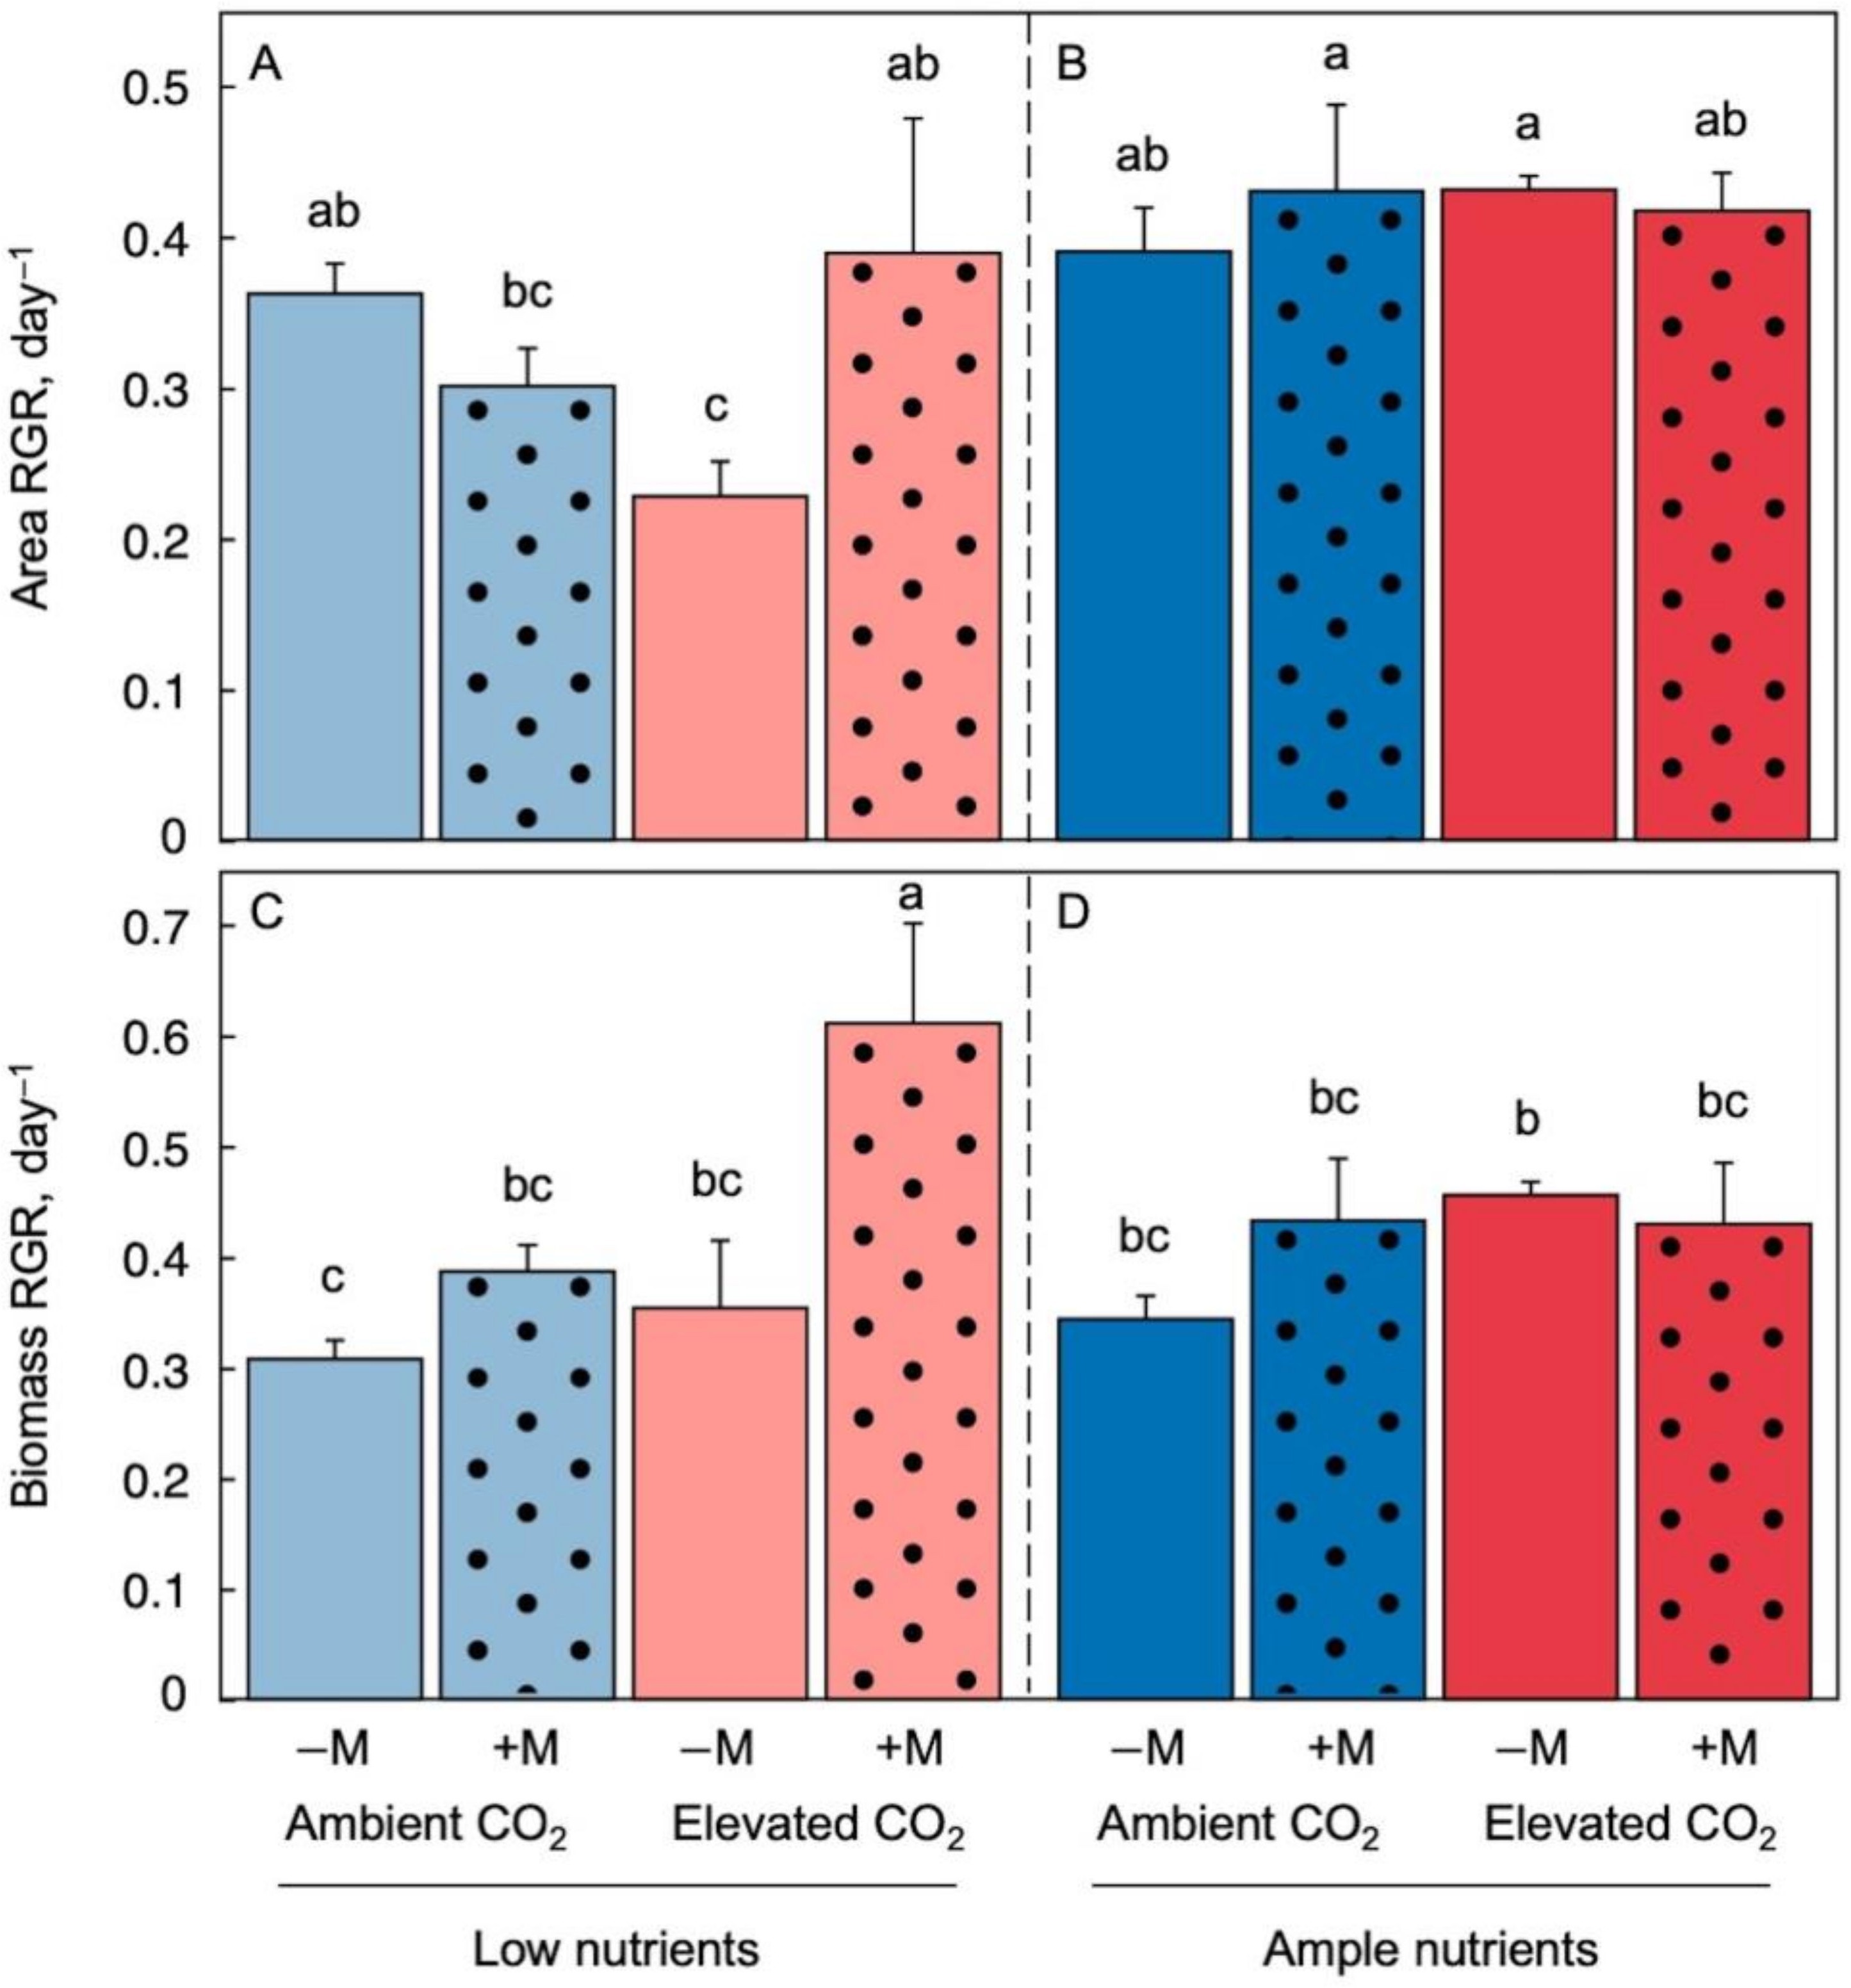 Figure 1. Relative growth rate (RGR) of frond area expansion under low (A) and ample (B) nutrients as well as RGR of dry biomass production under low (C) and ample (D) nutrients for Lemna minor grown in 1/20 (light blue or light red) or 1/2 (dark blue or red) strength Schenk & Hildebrandt medium under either ambient (blue) or elevated (red) CO2 levels. Blue and red-color columns indicate ambient and elevated CO2, respectively. Solid-fill columns represent plants that were not inoculated (−M) and dotted columns plants that were inoculated (+M) with microorganisms from a pond with L. minor. Mean values ± standard deviations; n = 3. Different lower-case letters represent significant differences at p < 0.05.  